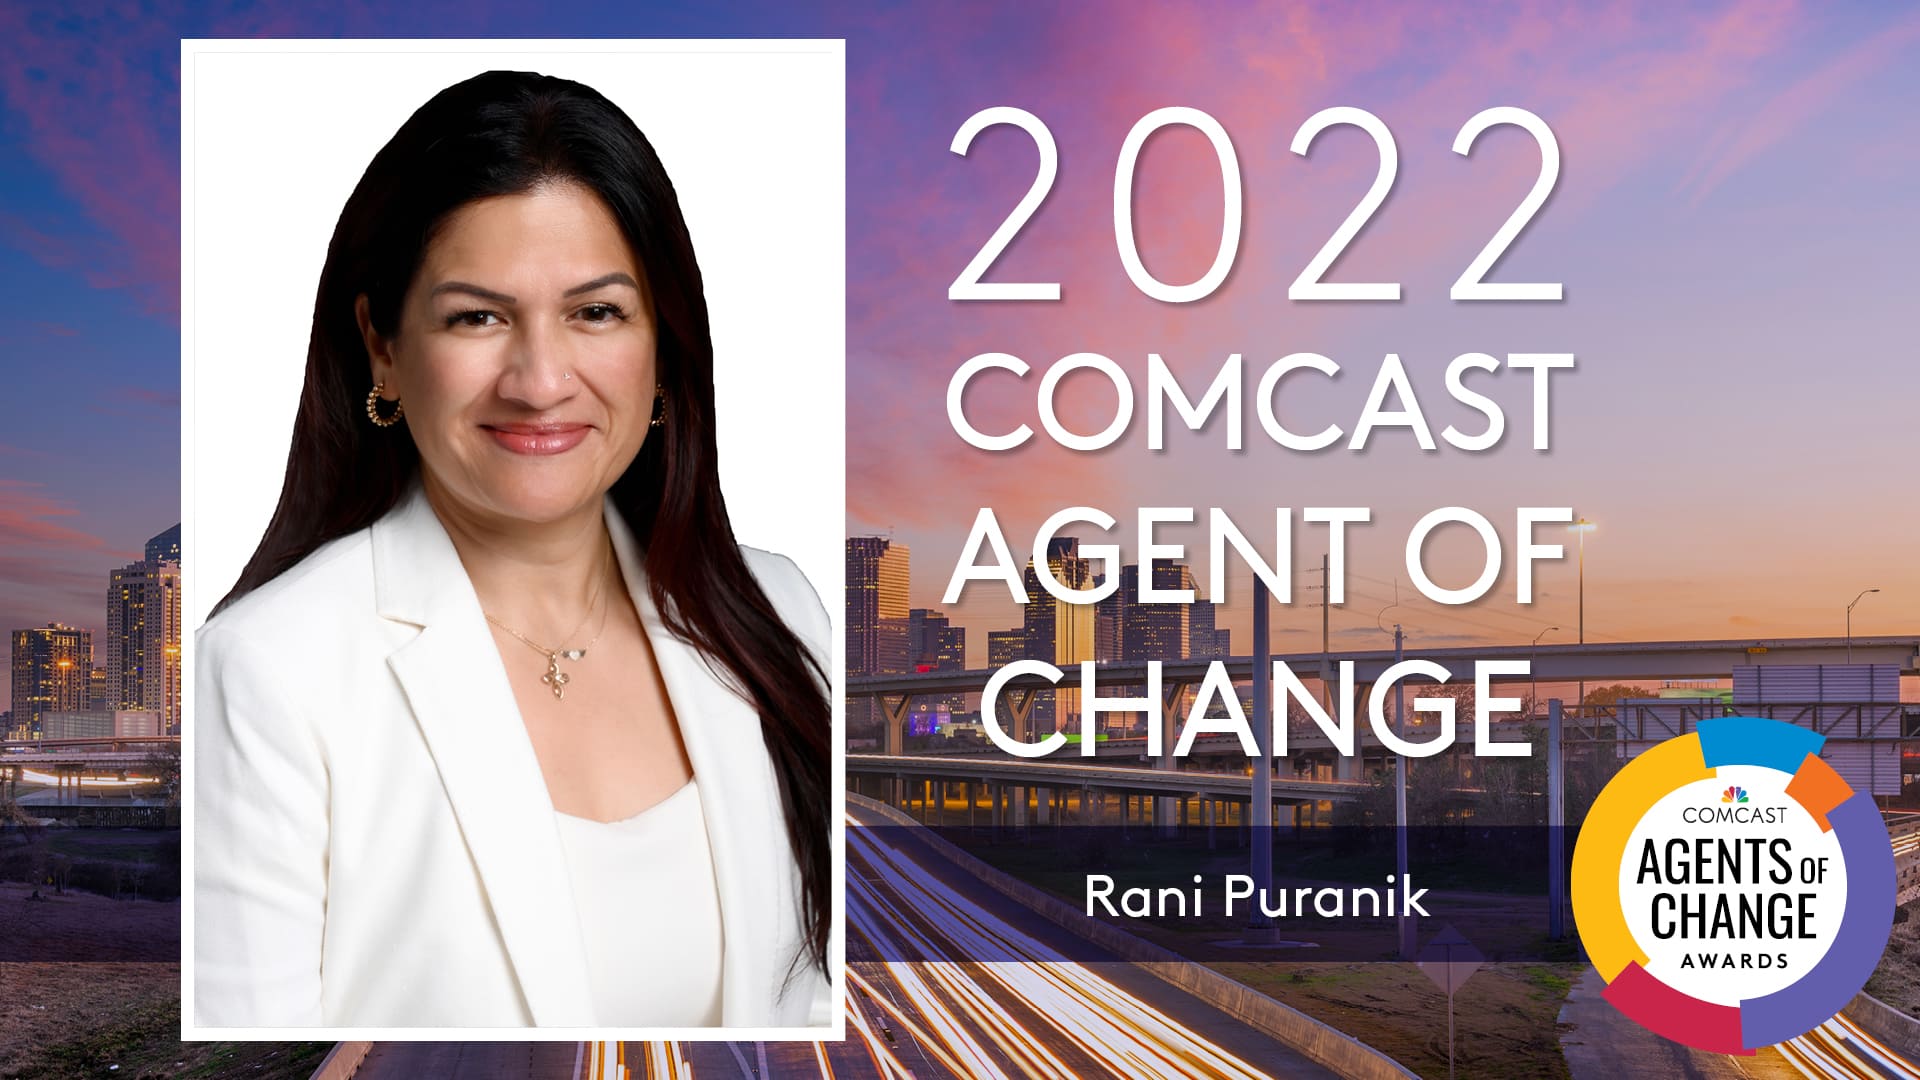 Honored as 2022 Comcast Agent of Change